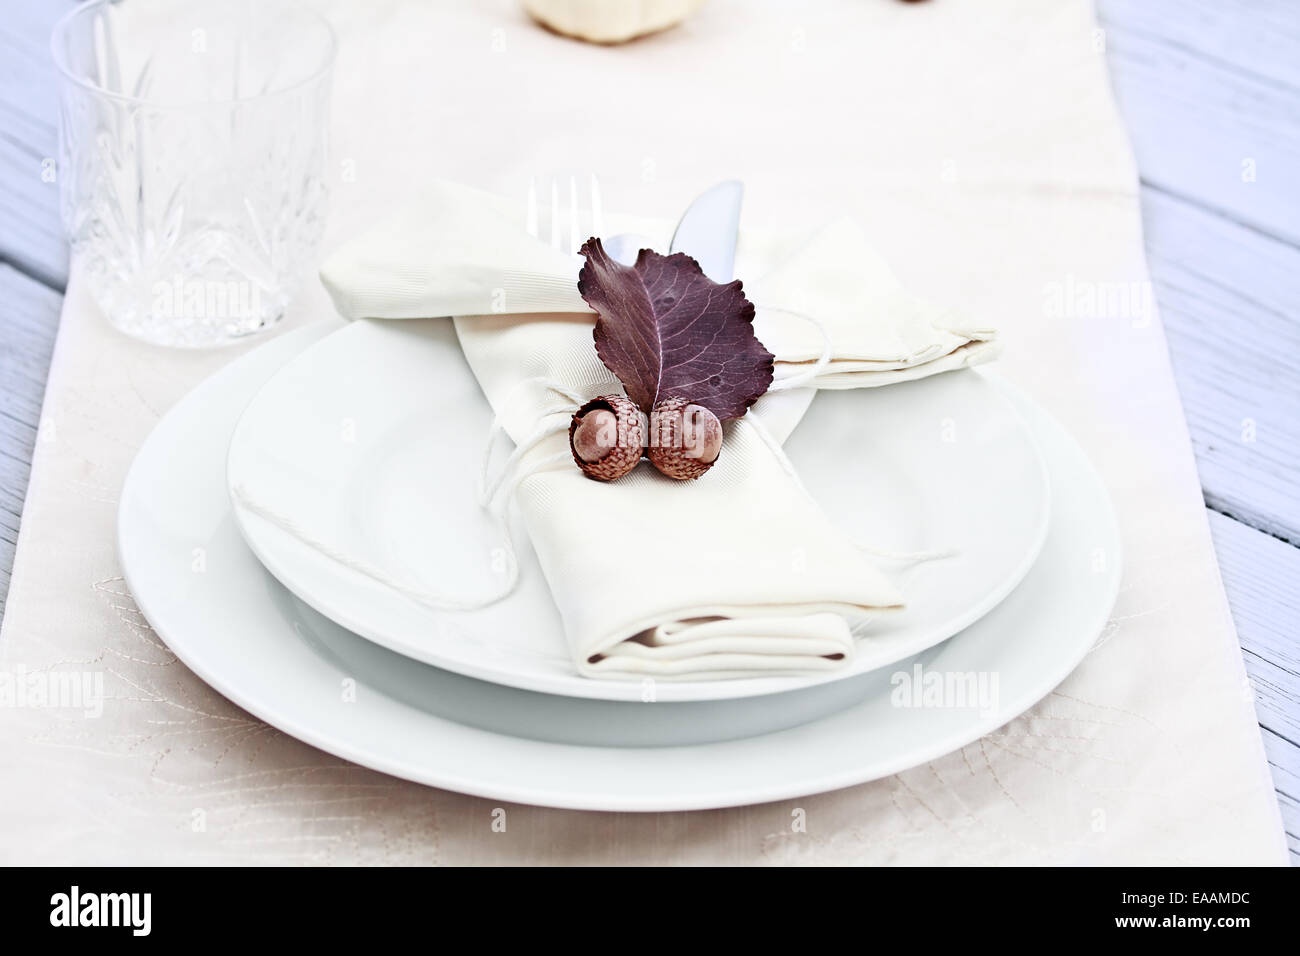 Rustic table decorated with leaves and acorns, ready for a Thanksgiving meal. Stock Photo